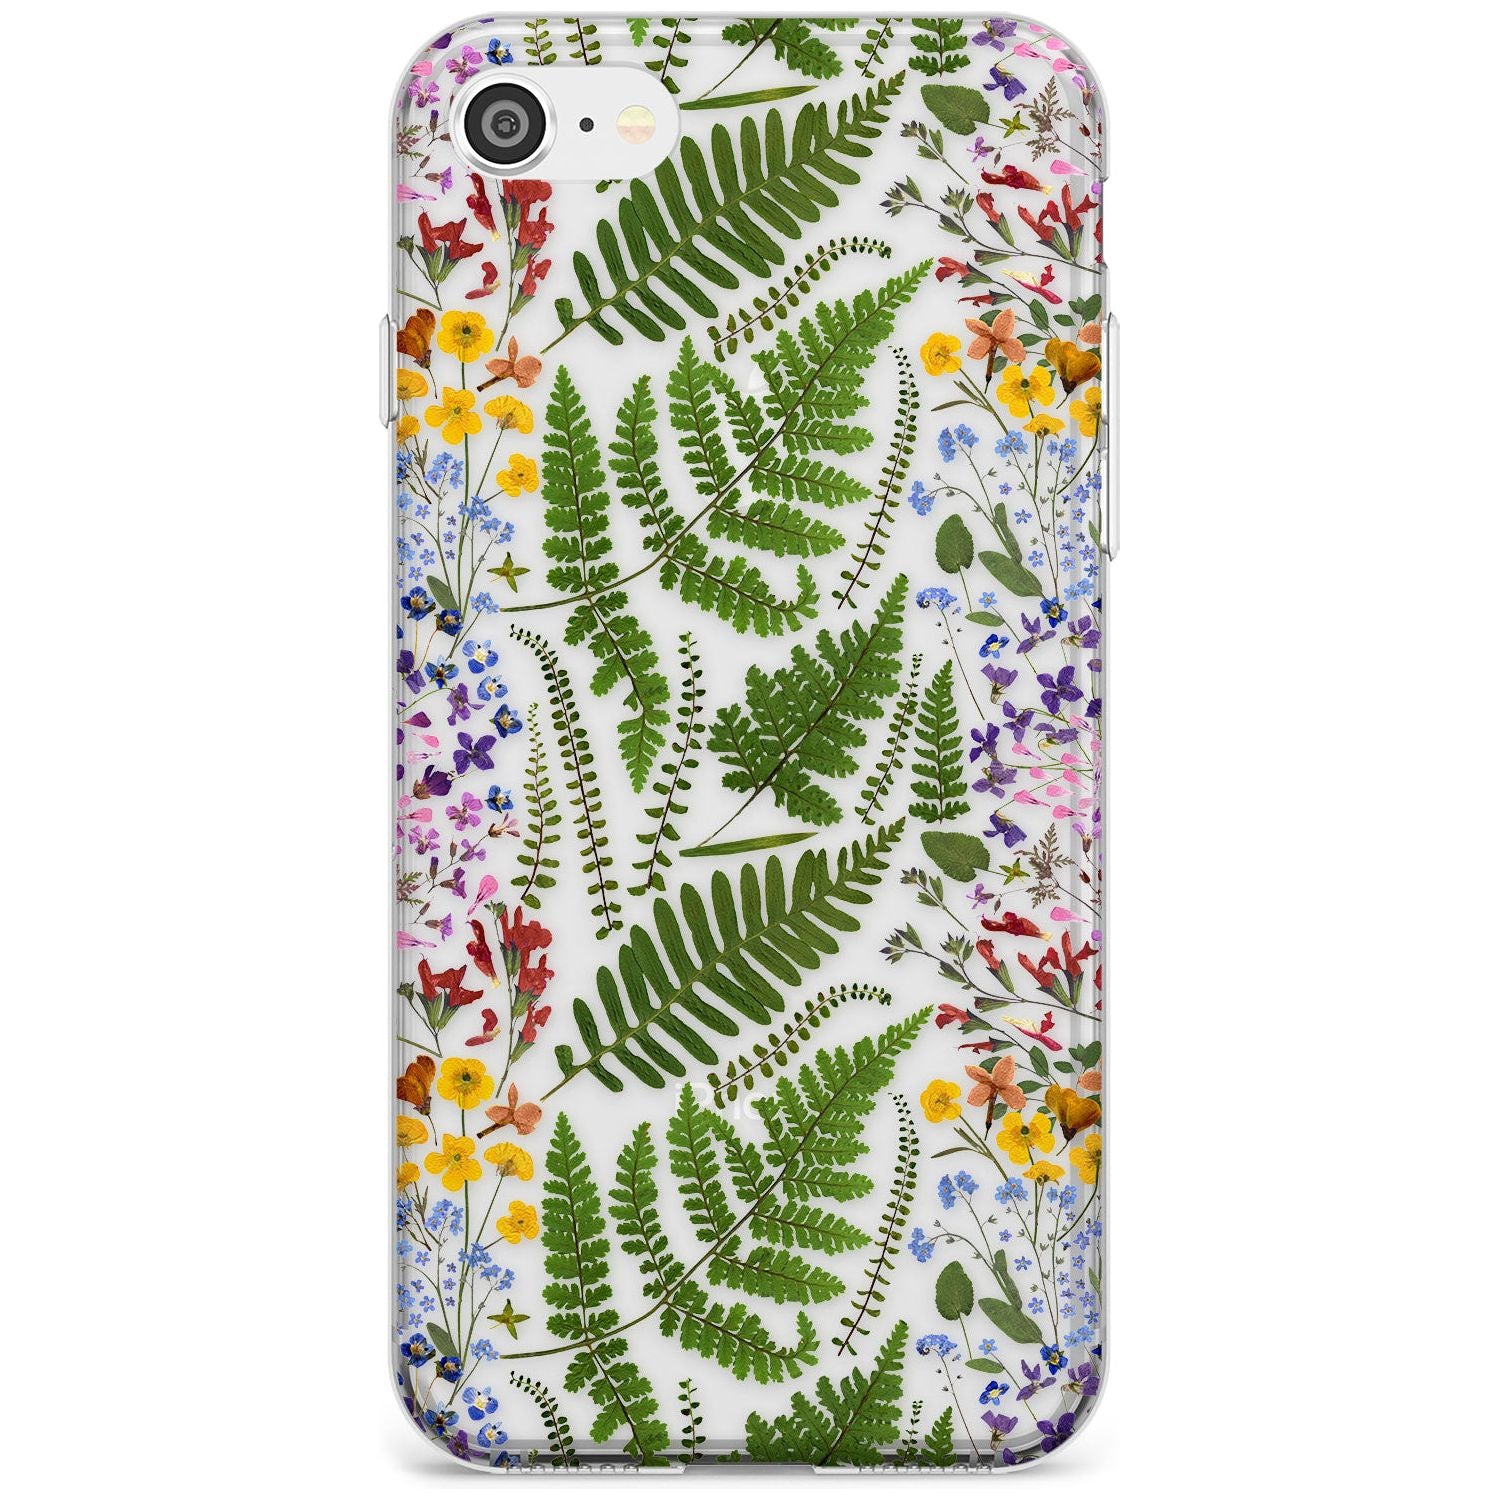 Busy Floral and Fern Design Slim TPU Phone Case for iPhone SE 8 7 Plus